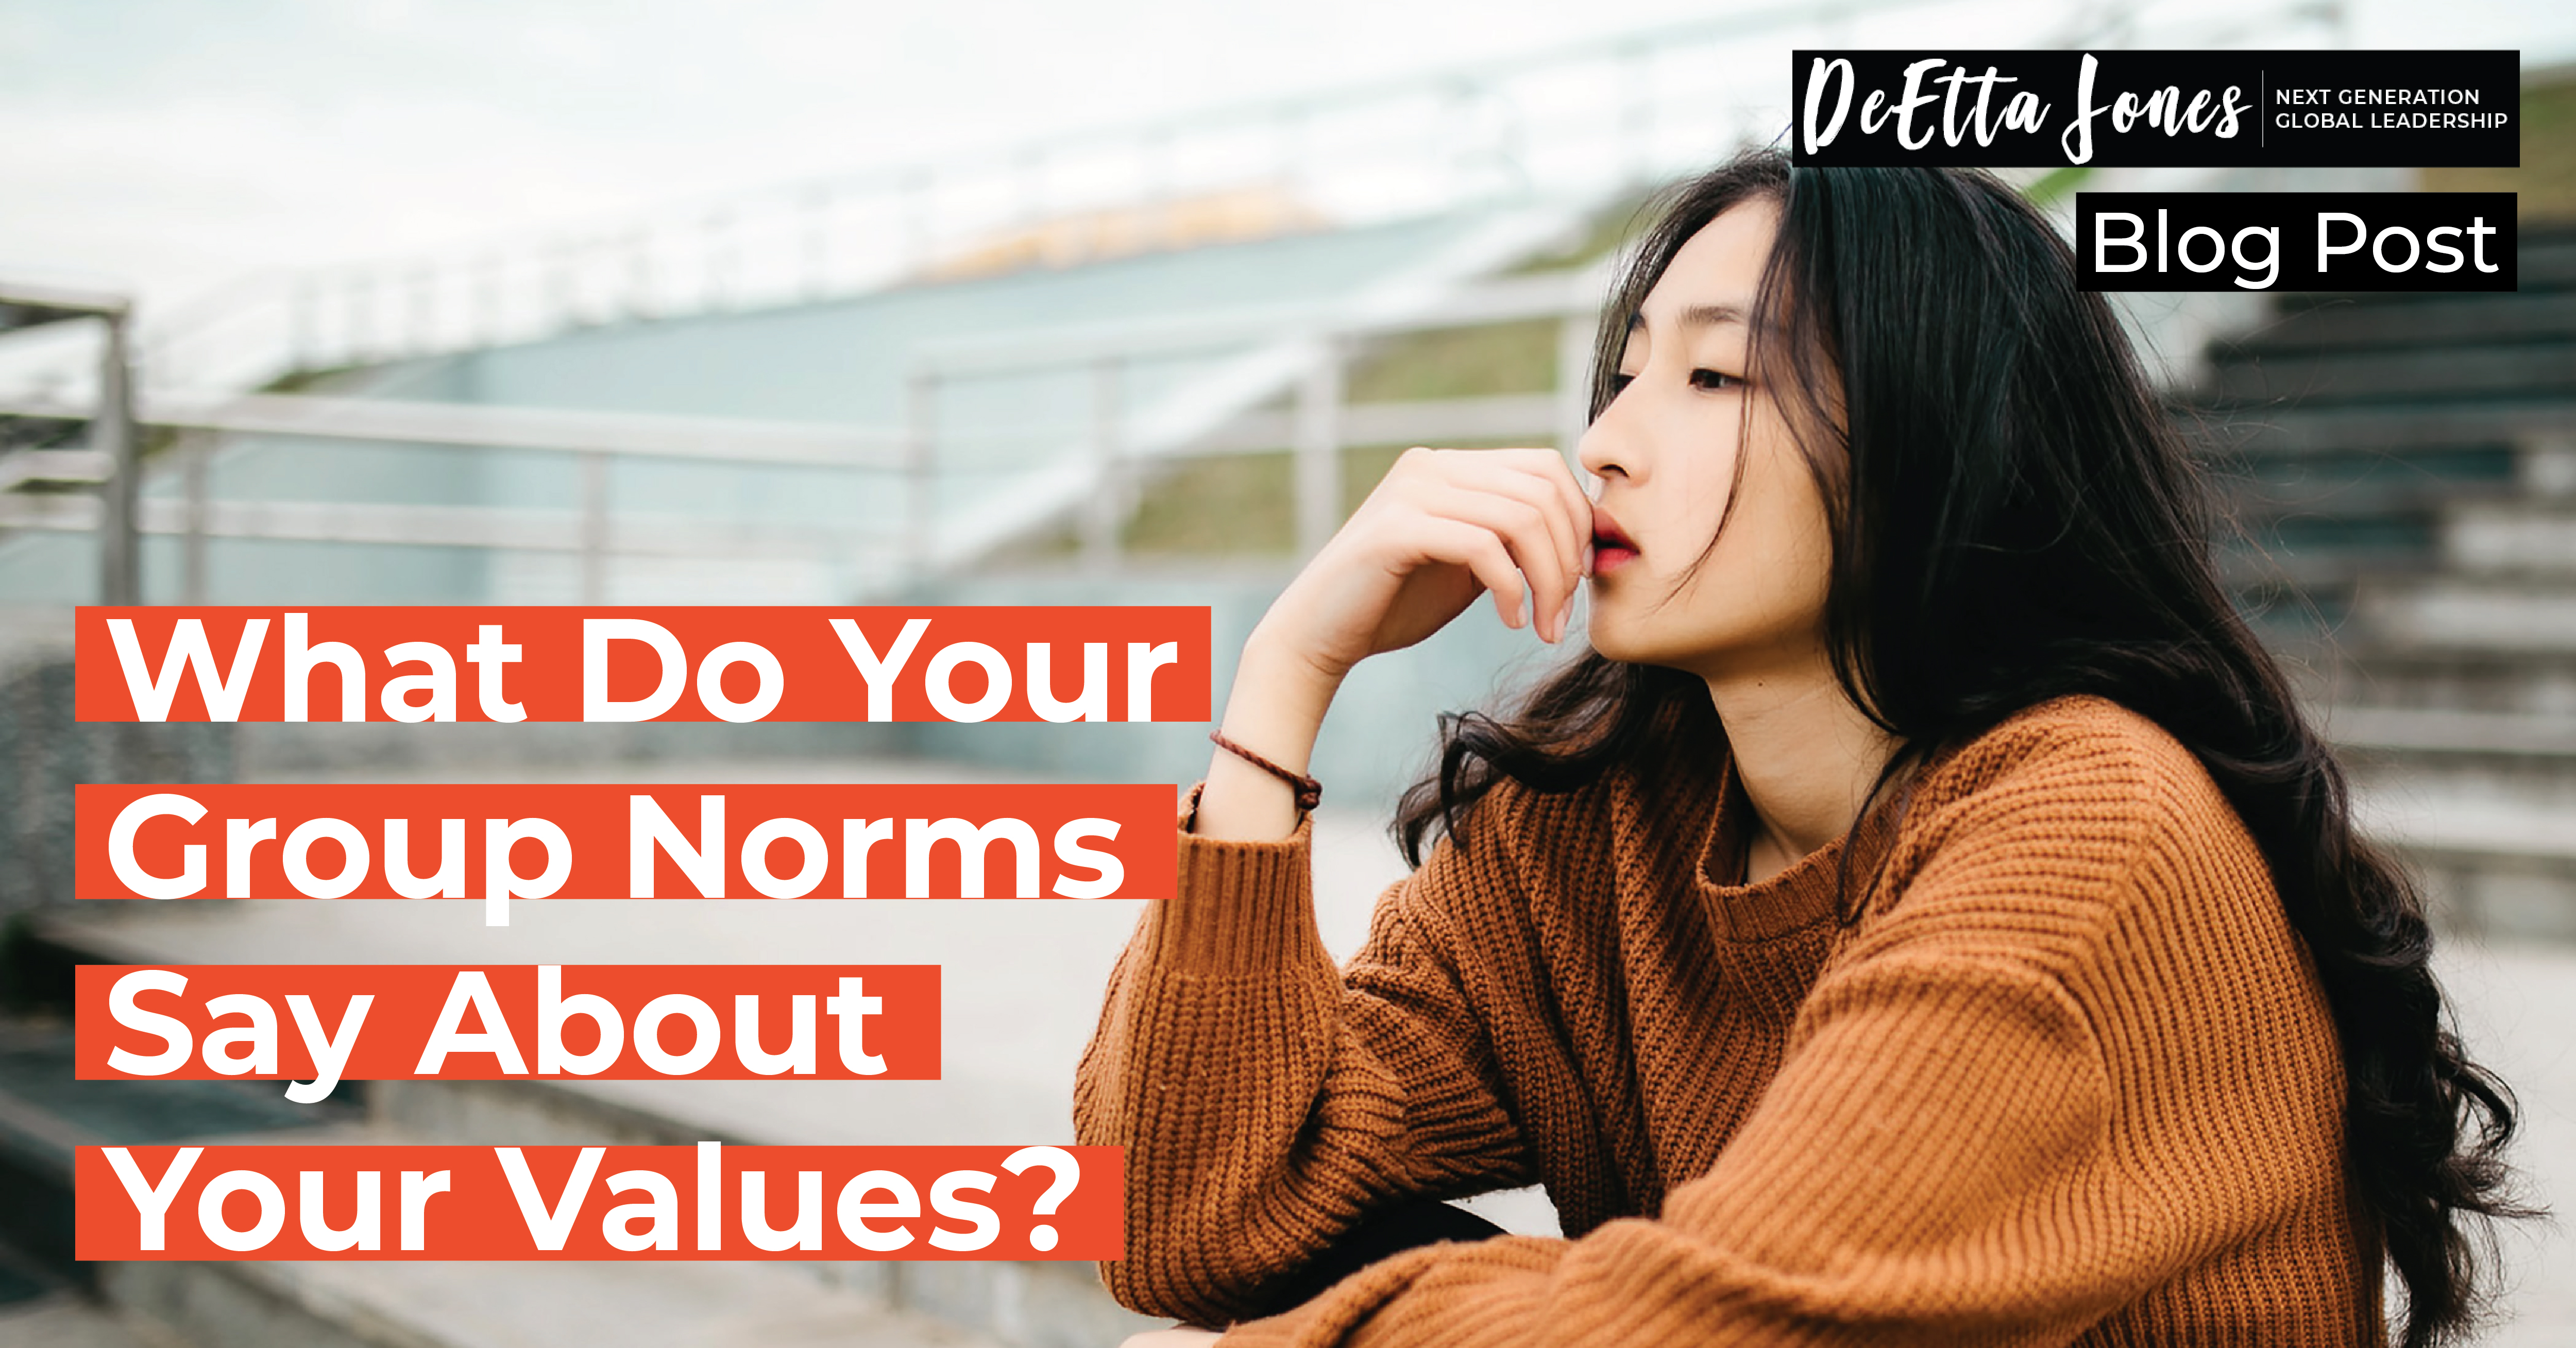 What Do Your Group Norms Say About Your Values?